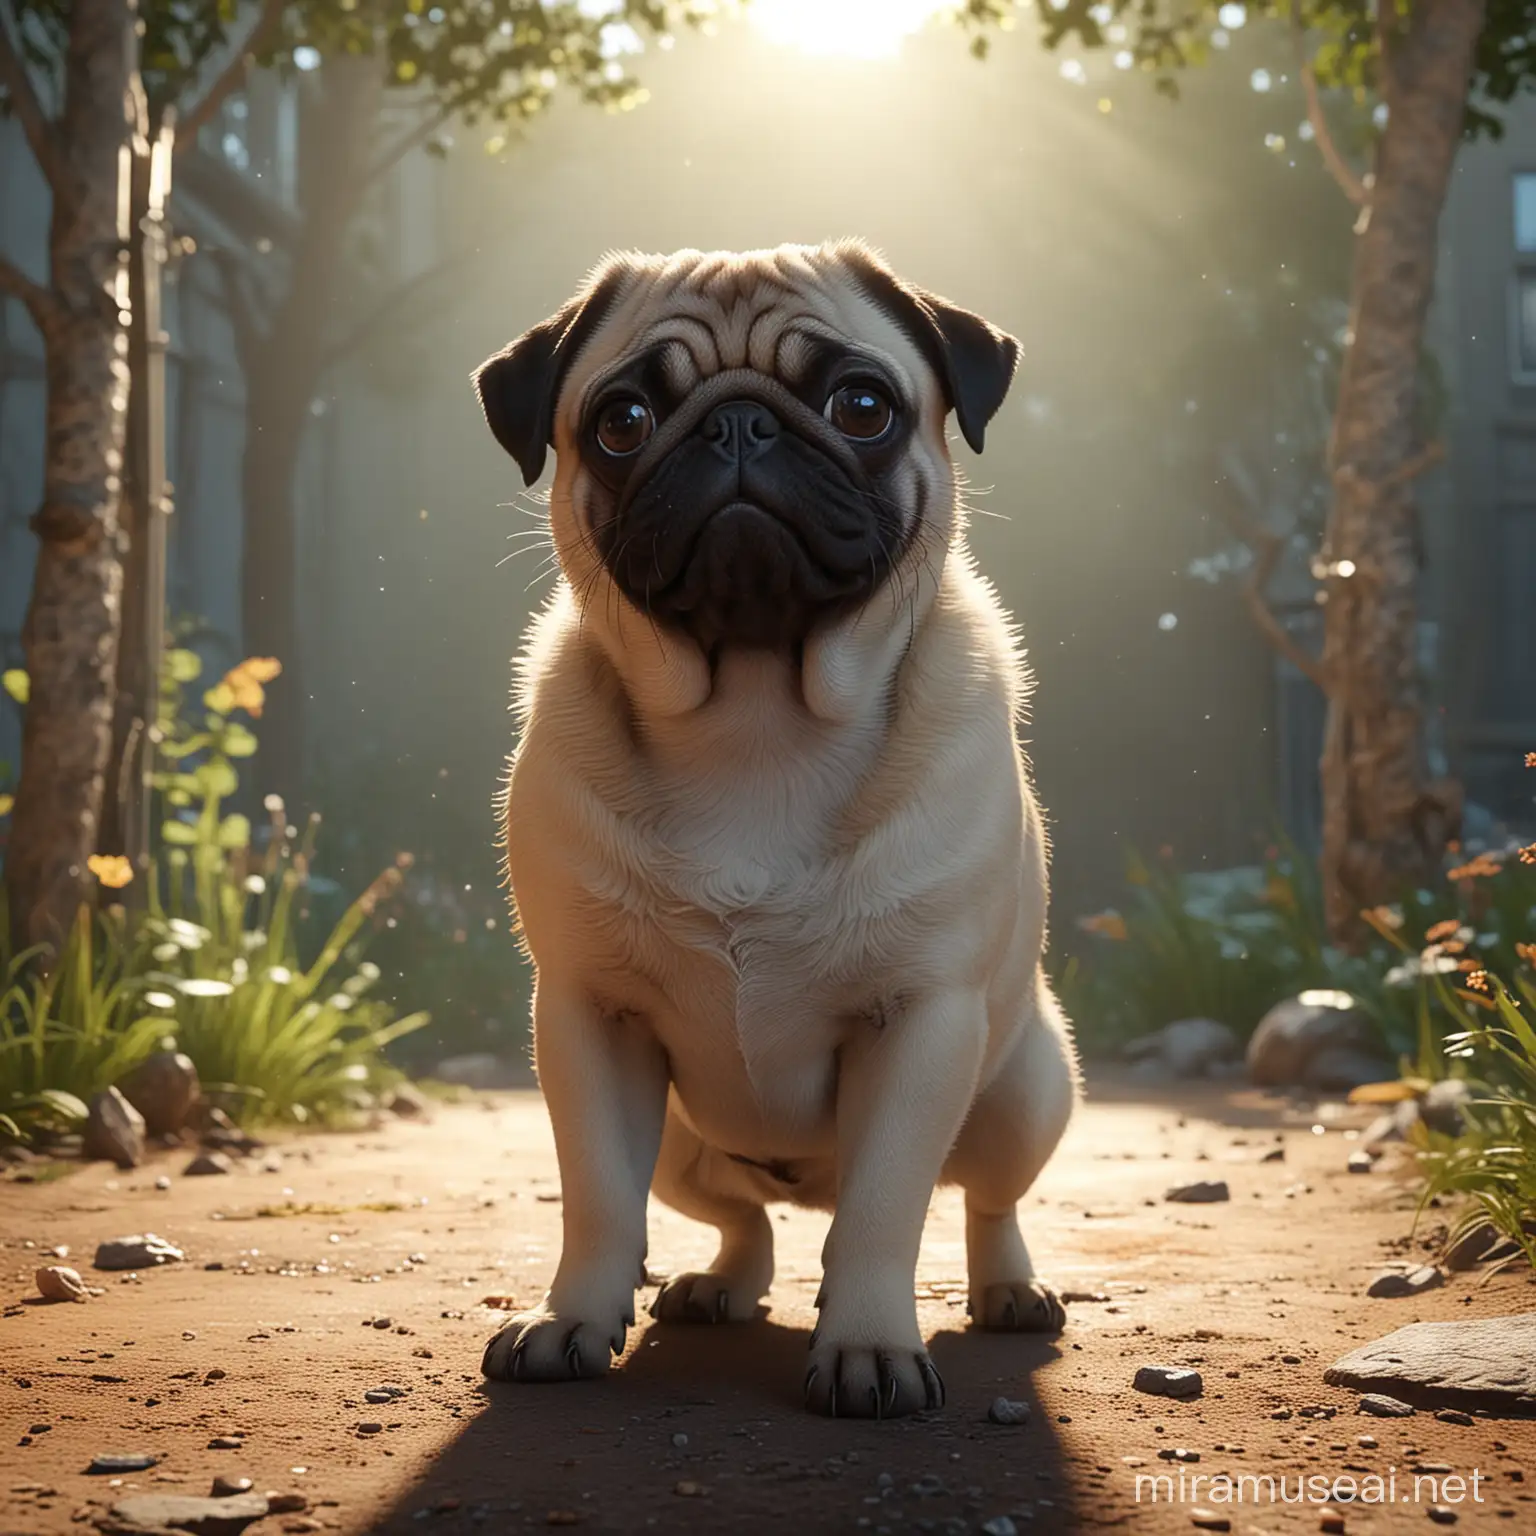 Pug. light background, color grading, unrealistic, super cute faces, super detailed background, whole picture with background, whole background is filled, epth of Field, Unreal
Engine, VR, Good, Massive, Halfrear Lighting, Backlight, Natural Lighting, Incandescent, Optical Fiber, Cinematic Lighting, Studio Lighting, Soft Lighting, Volumetric, Contre-Jour, Beautiful Lighting, Accent Lighting, Global Illumination, Screen Space Global Illumination, Ray Tracing Global Illumination, Optics, Scattering, Glowing, Shadows, Rough, Shimmering, Ray Tracing Reflections, Lumen ReflectionsDepth of Field, Unreal Engine, professional mid journey prompt by sam mcfly, in the style of digital art techniques, cute and dreamy, whimsical design, cryengine, mischievous feline motif, album covers, d&d --ar 99:124 --v 5 --s 250